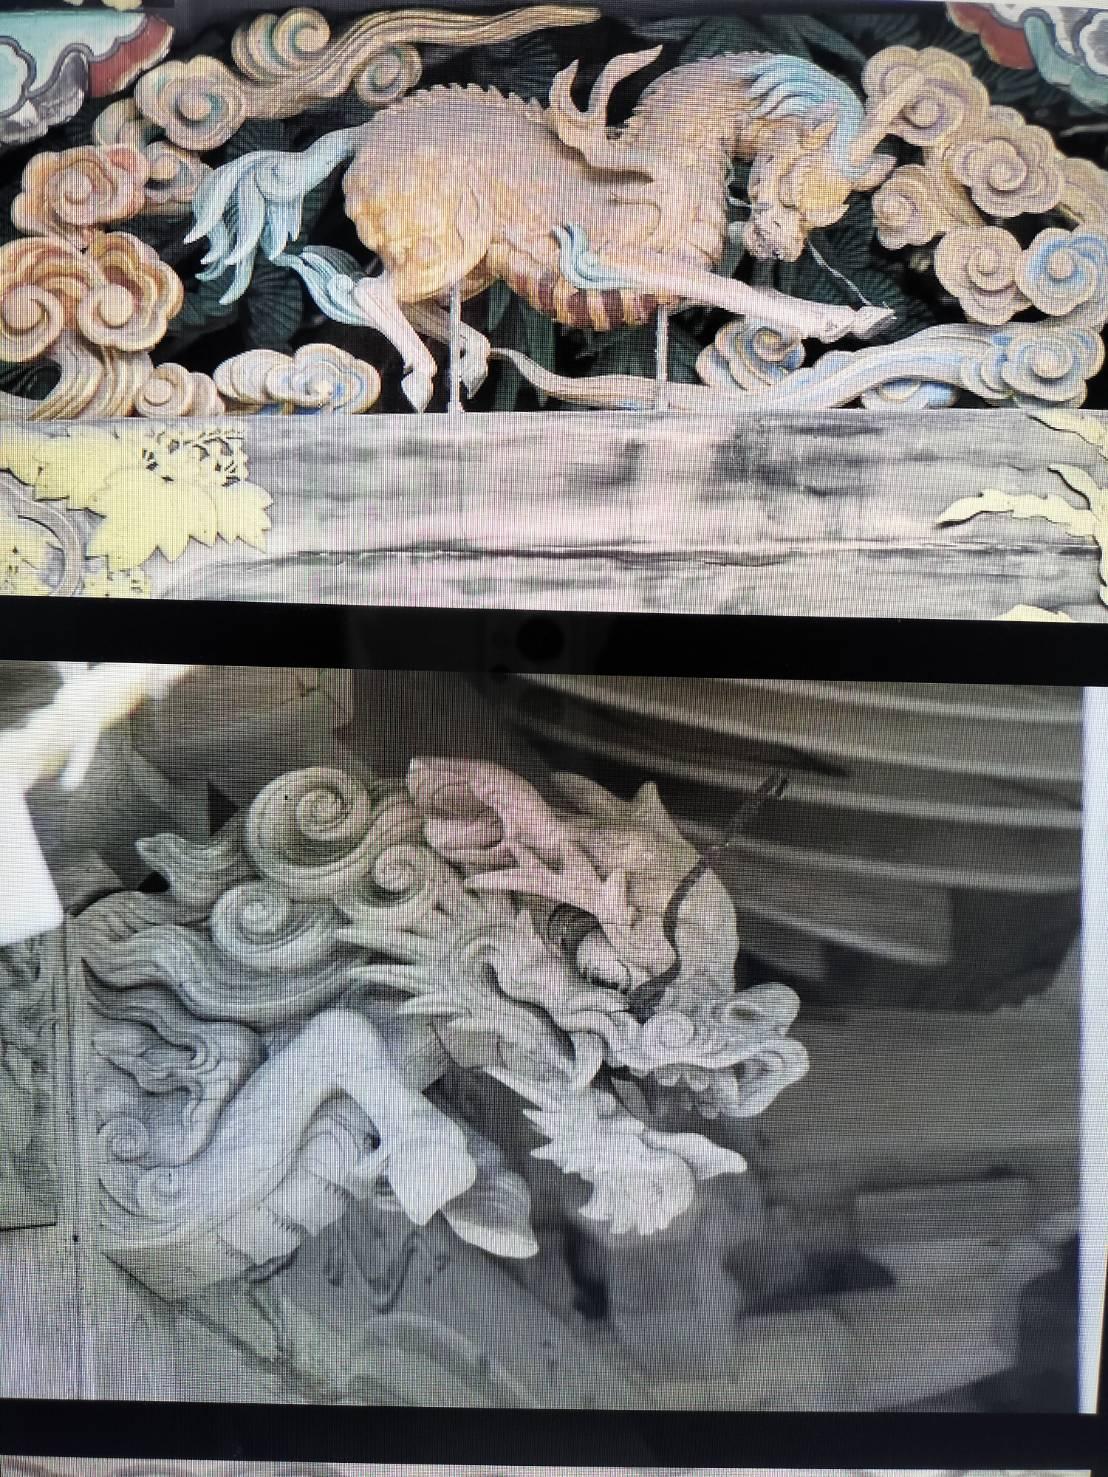 Japanese antique wood carving 